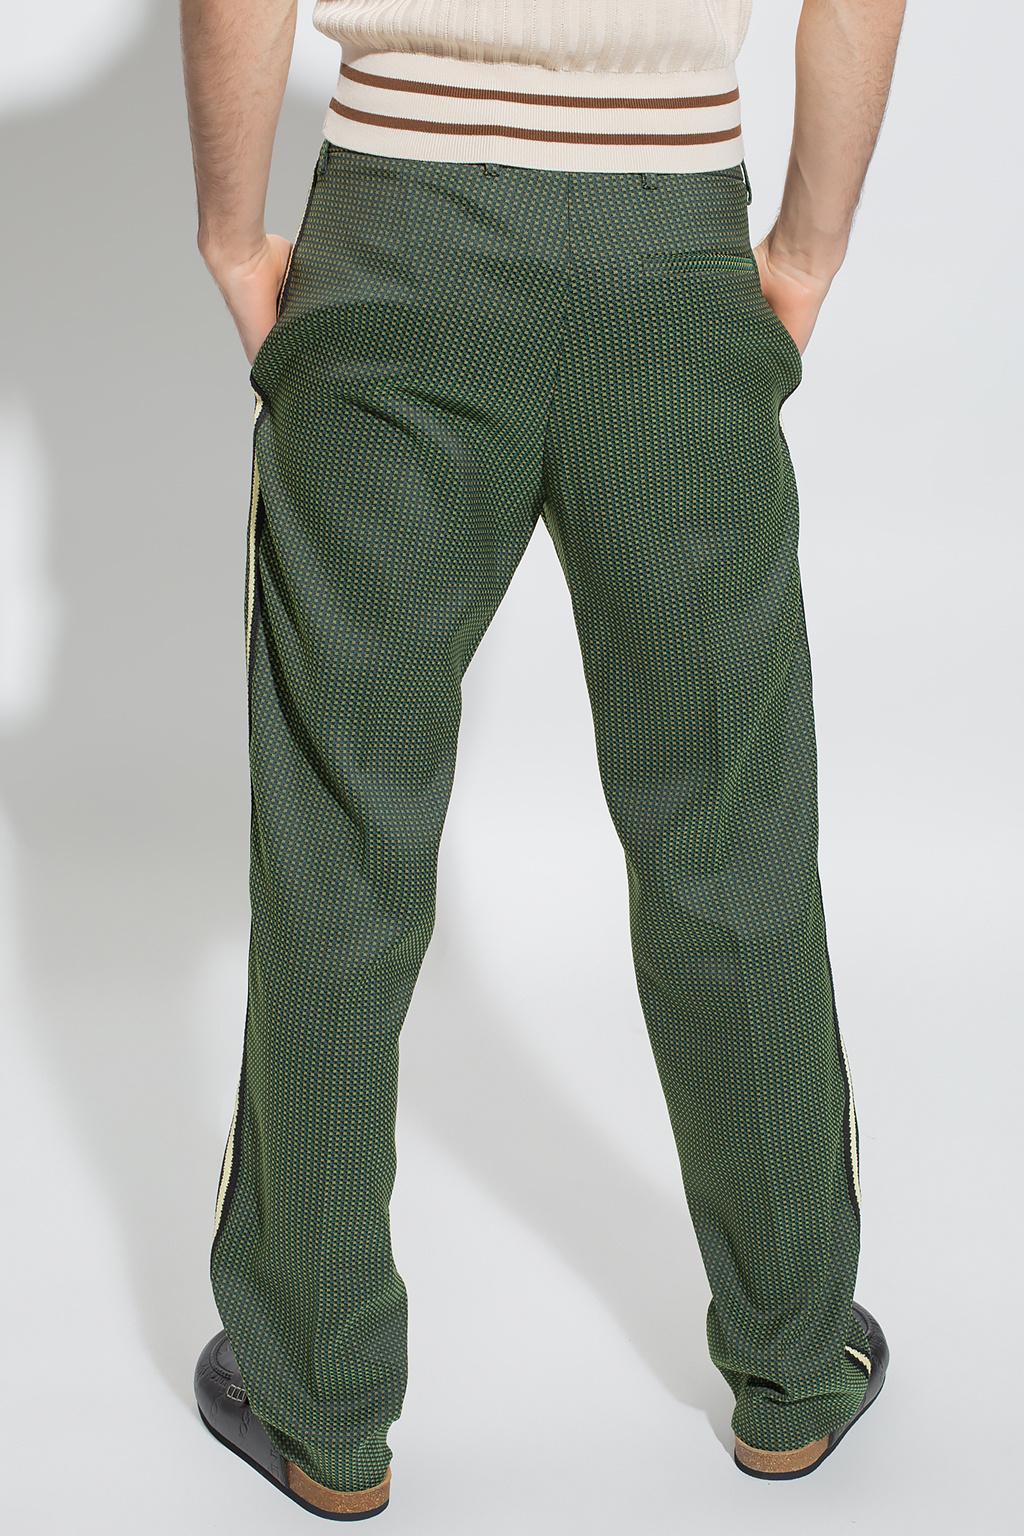 wales bonner harmonic trousers チェックパンツaw | www